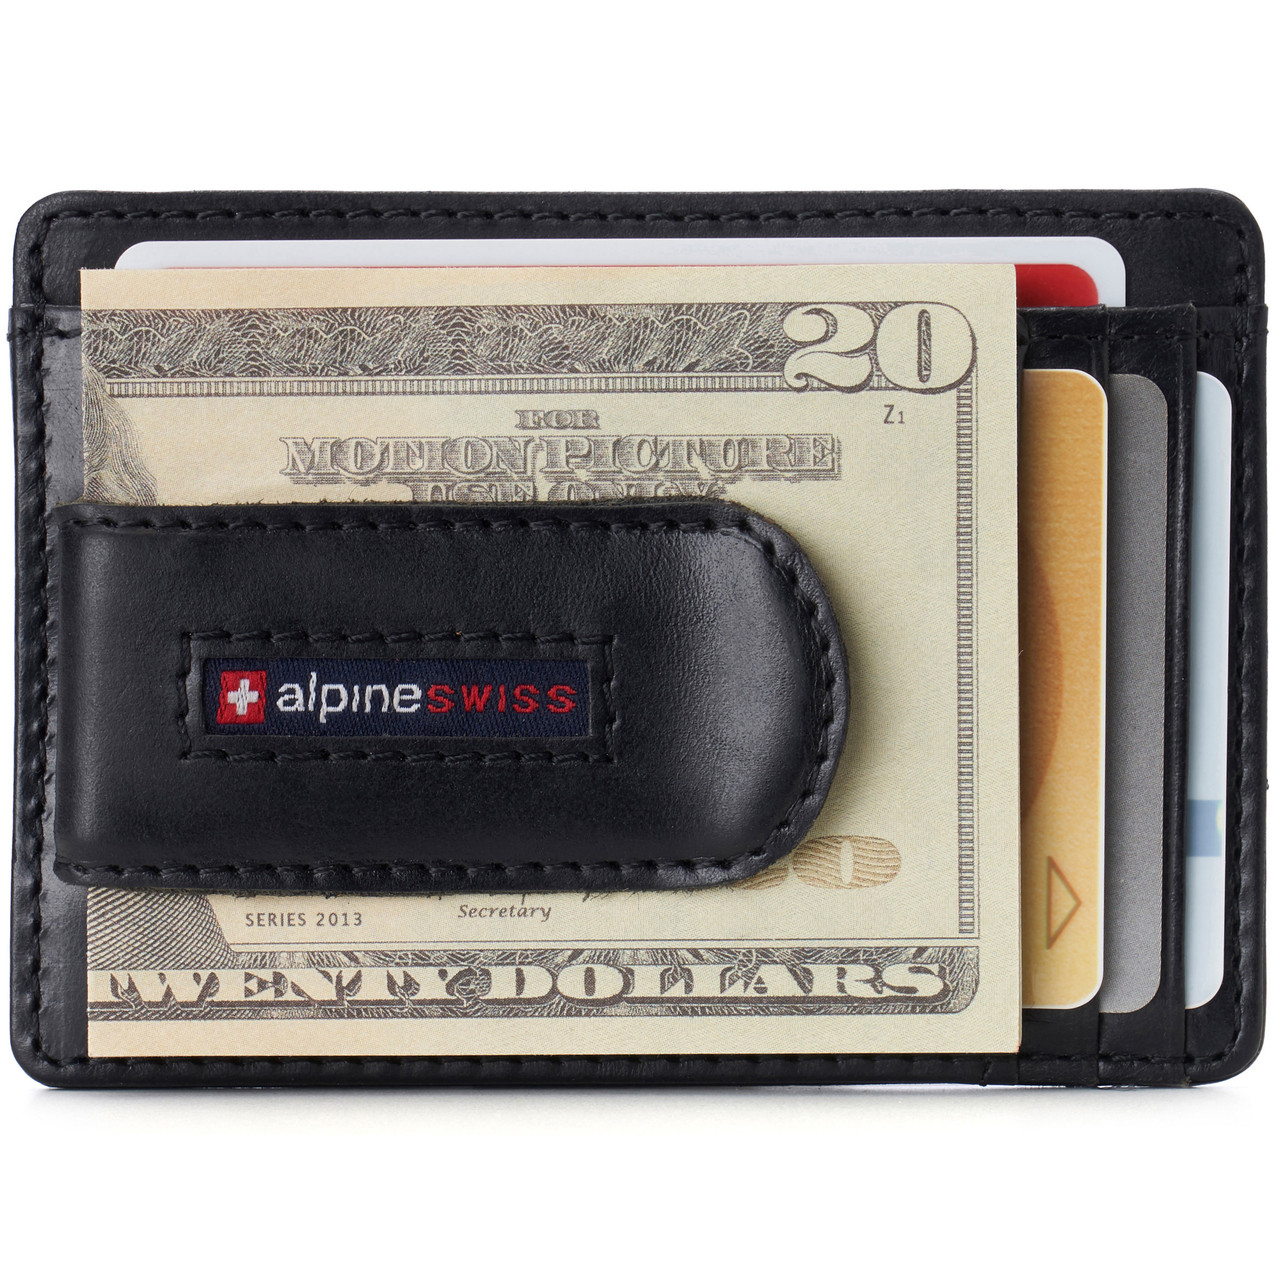 front pocket wallet with money clip